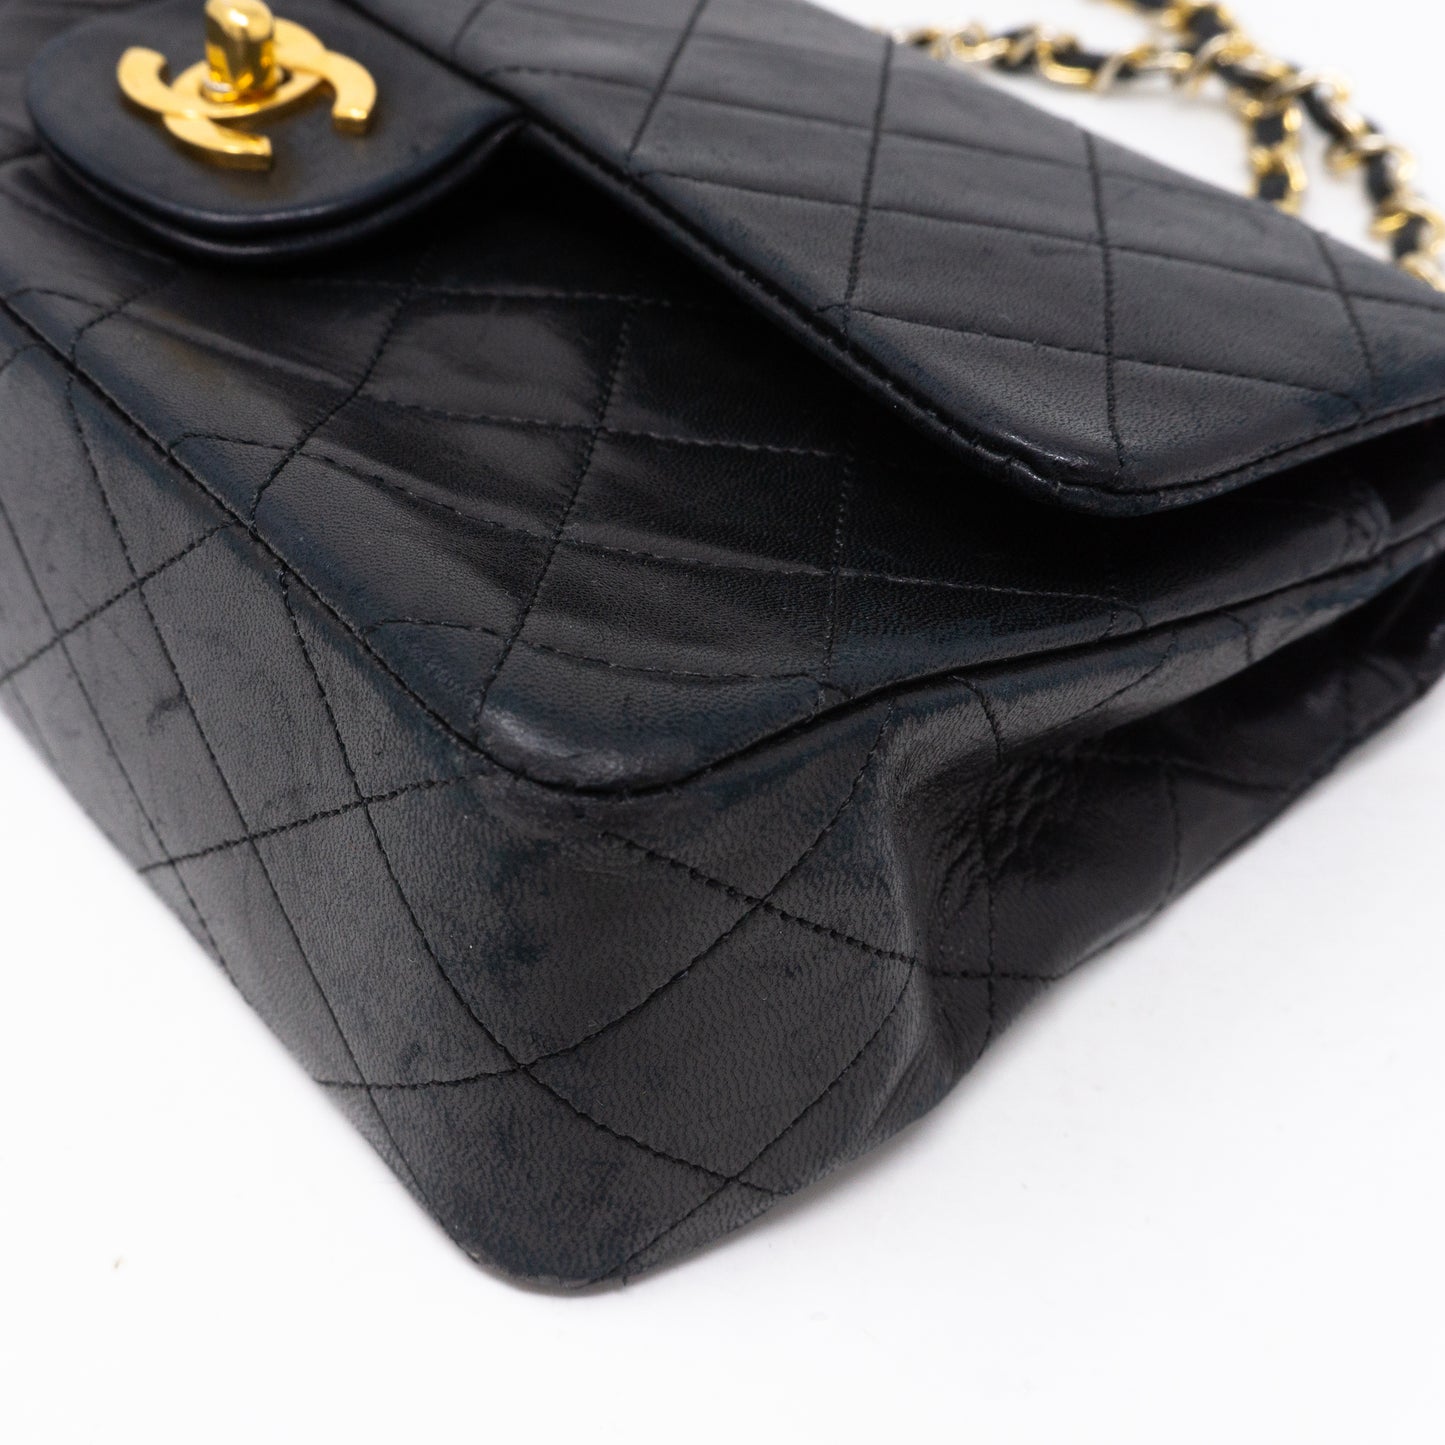 Classic Double Flap Small Black Gold